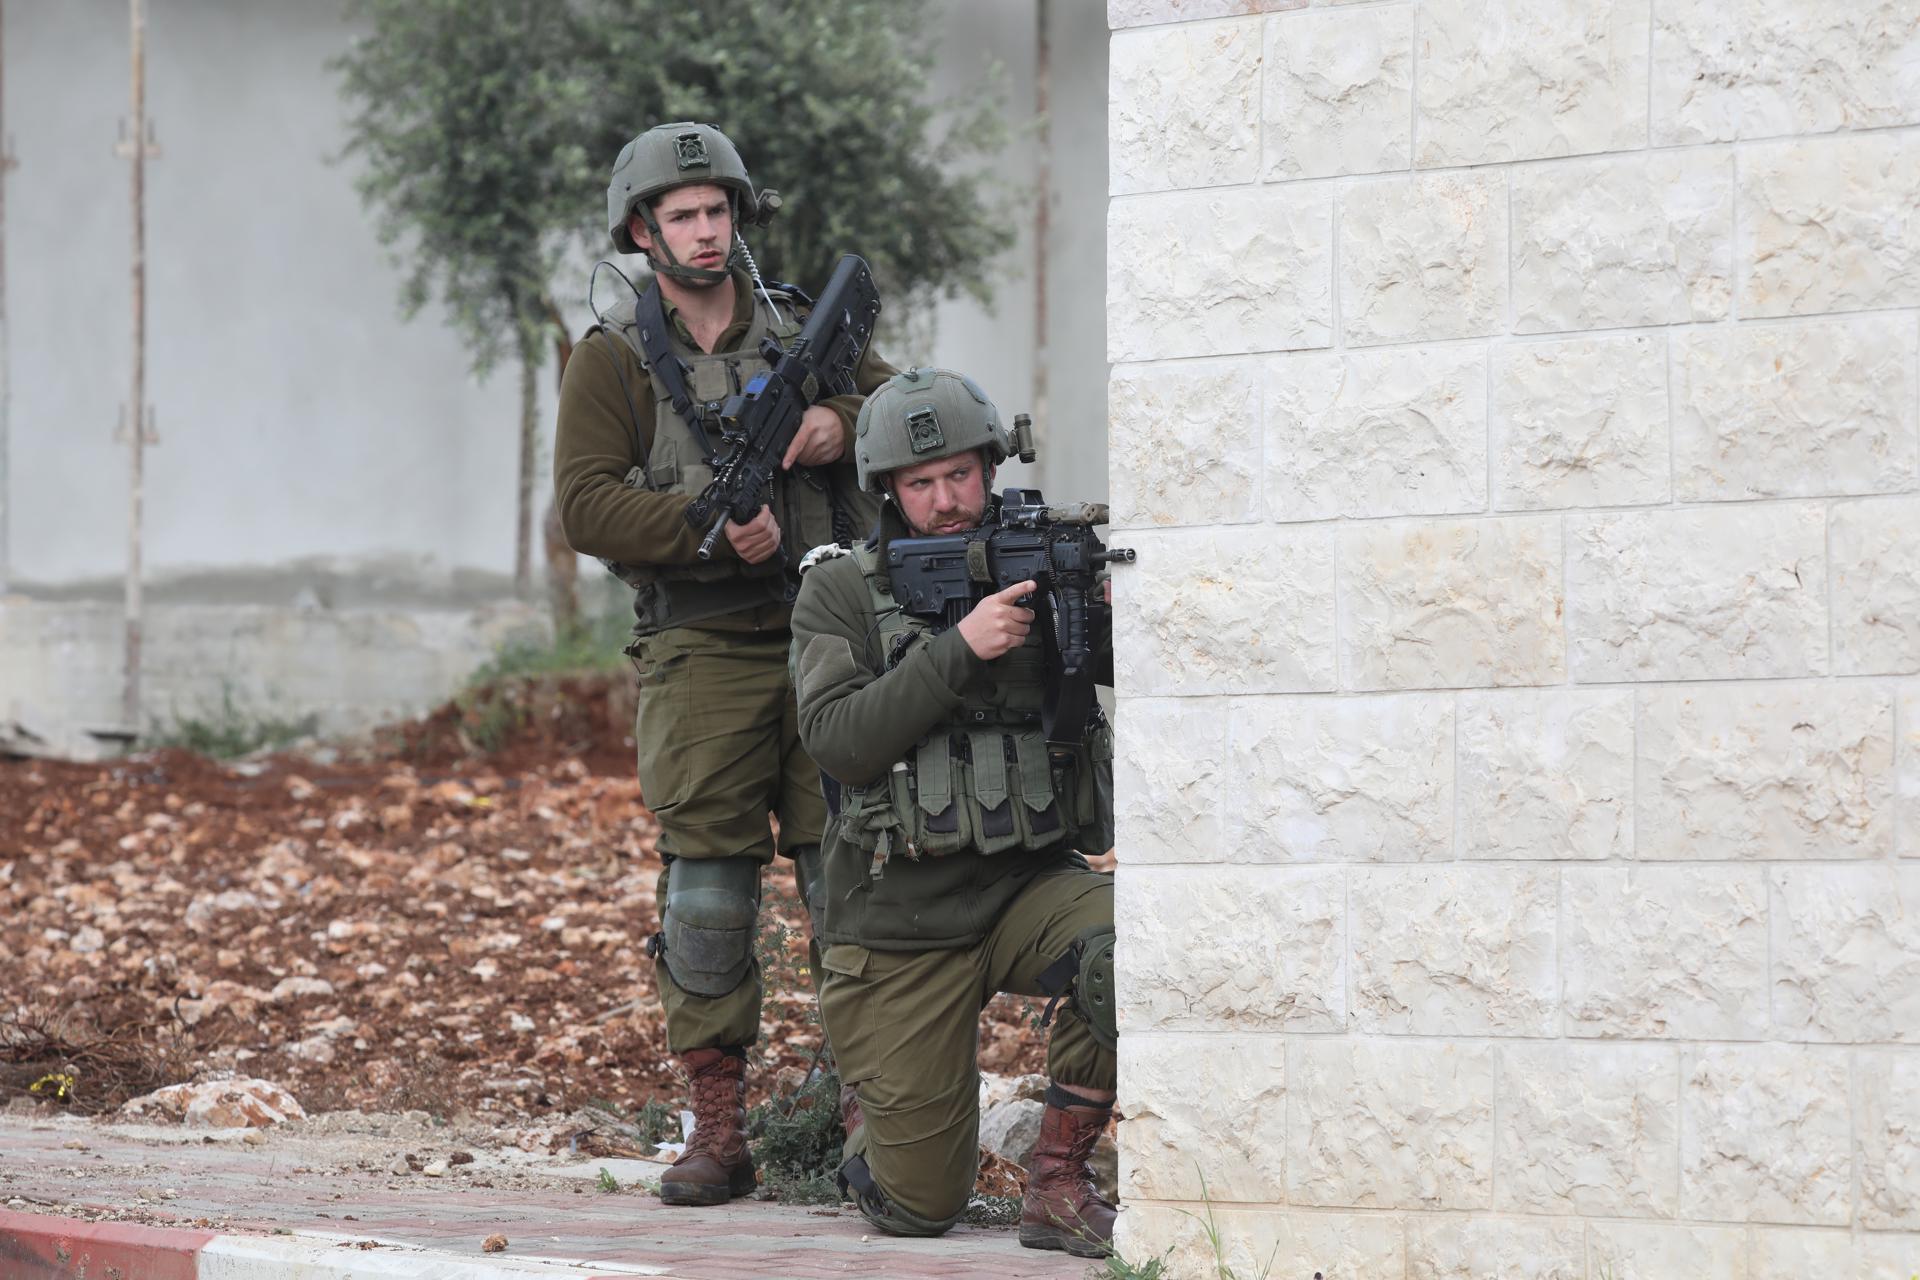 Israeli soldiers take positions in the area where two Palestinian militants were killed, near the settlement of Elon Moreh near the west bank city of Nablus, 11 April 2023. EFE/EPA/ALAA BADARNEH